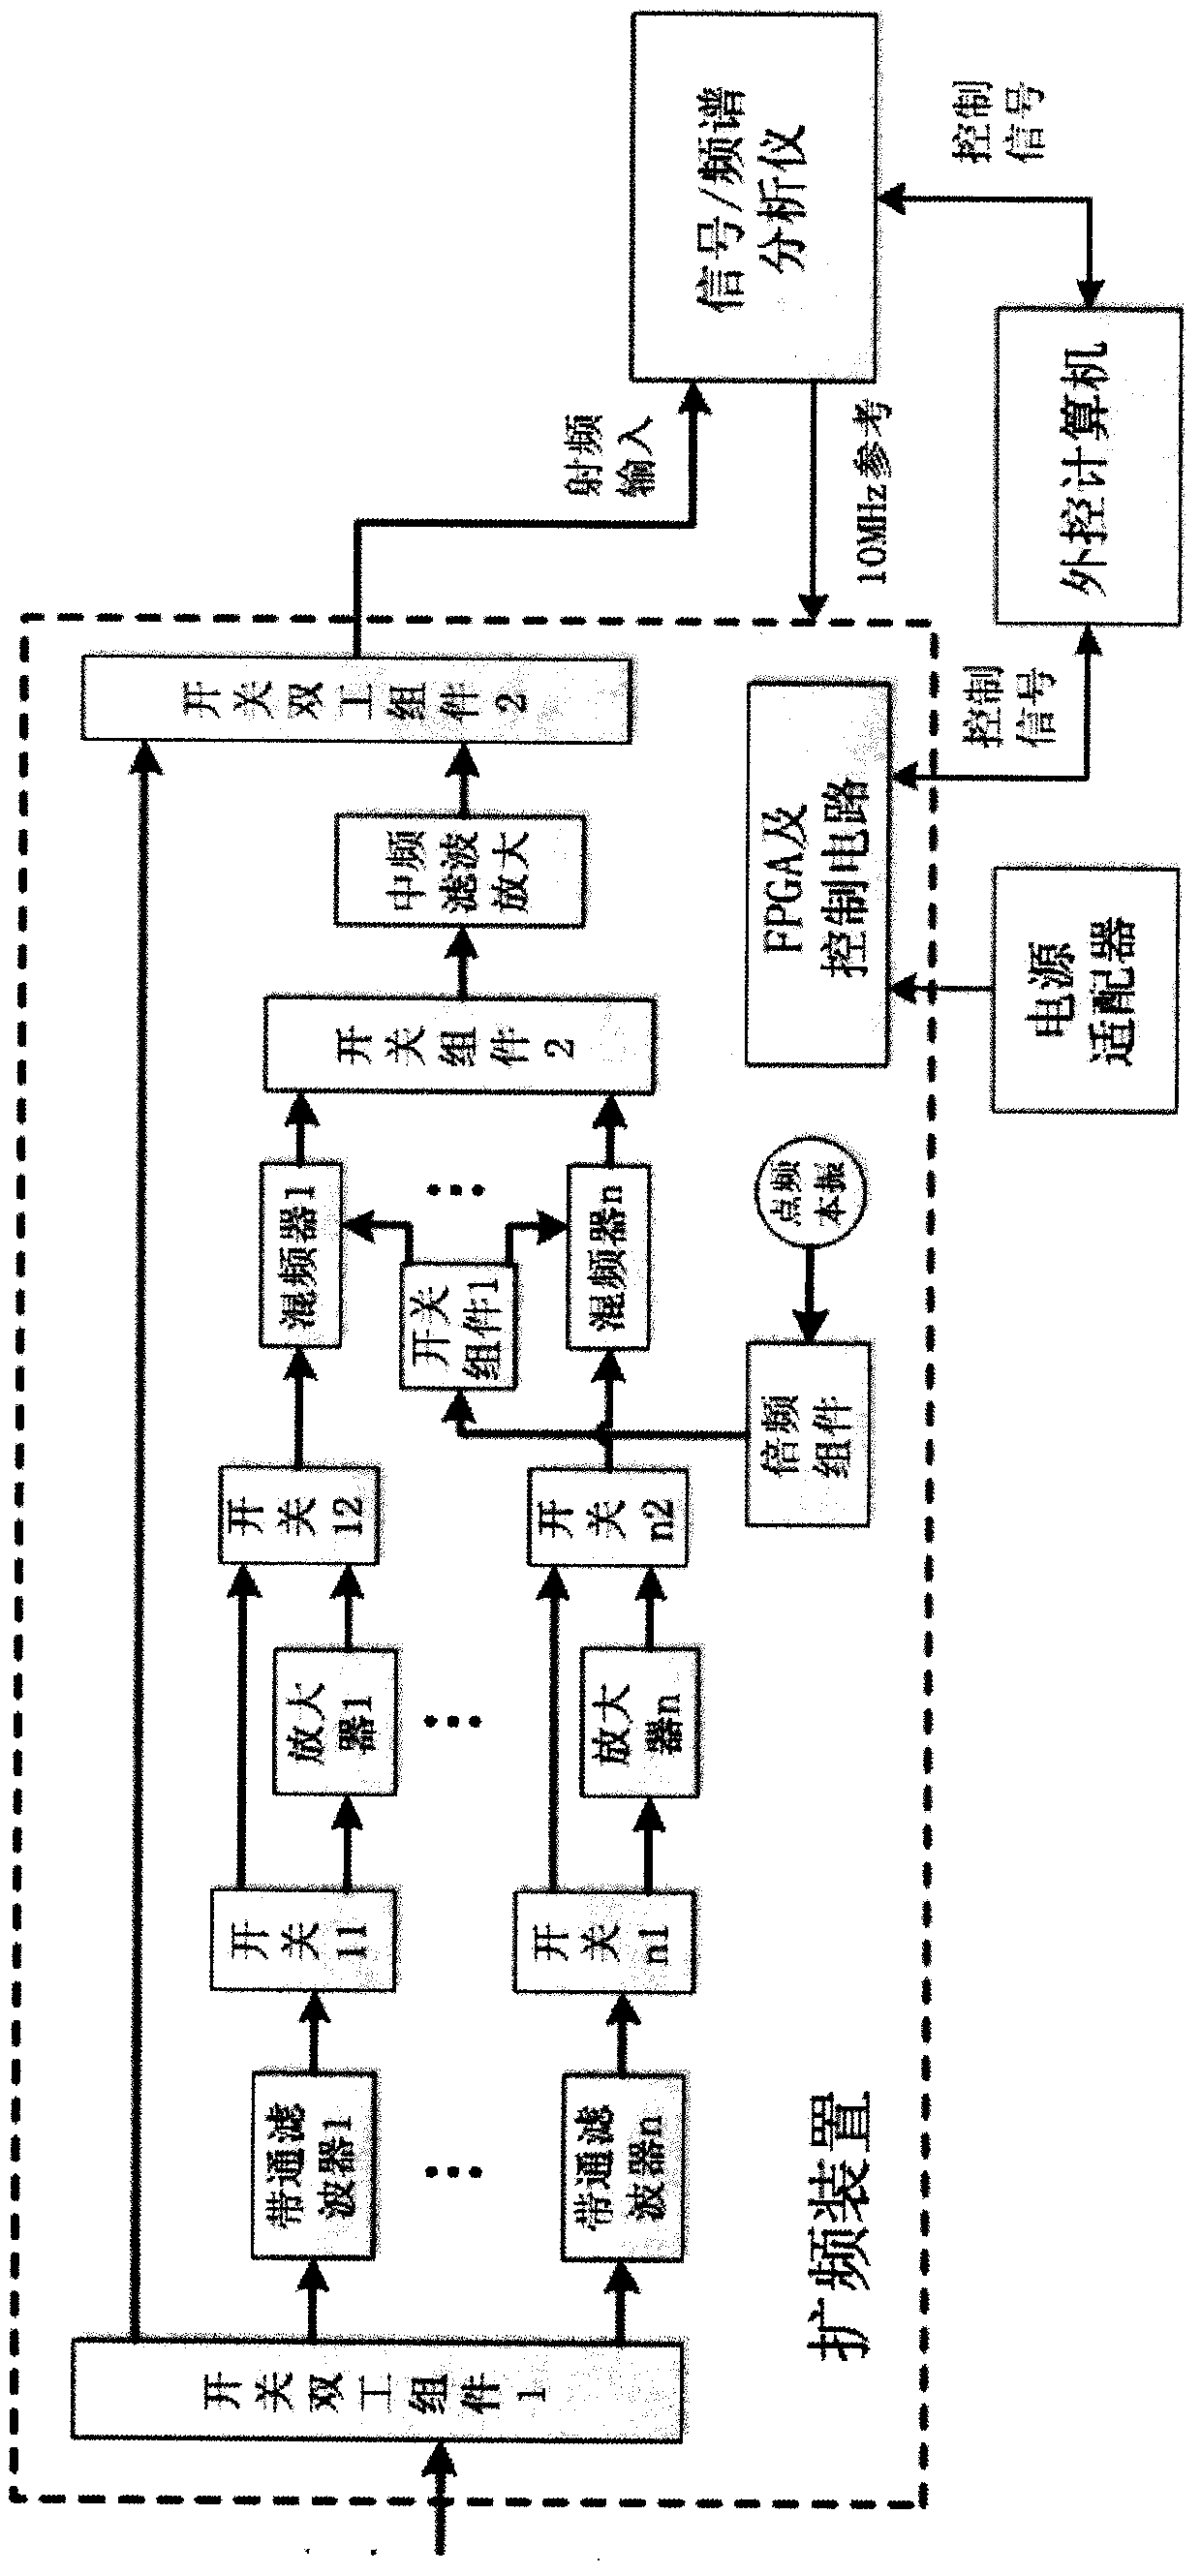 A device and method for realizing ultra-wideband spread spectrum of signal/spectrum analyzer